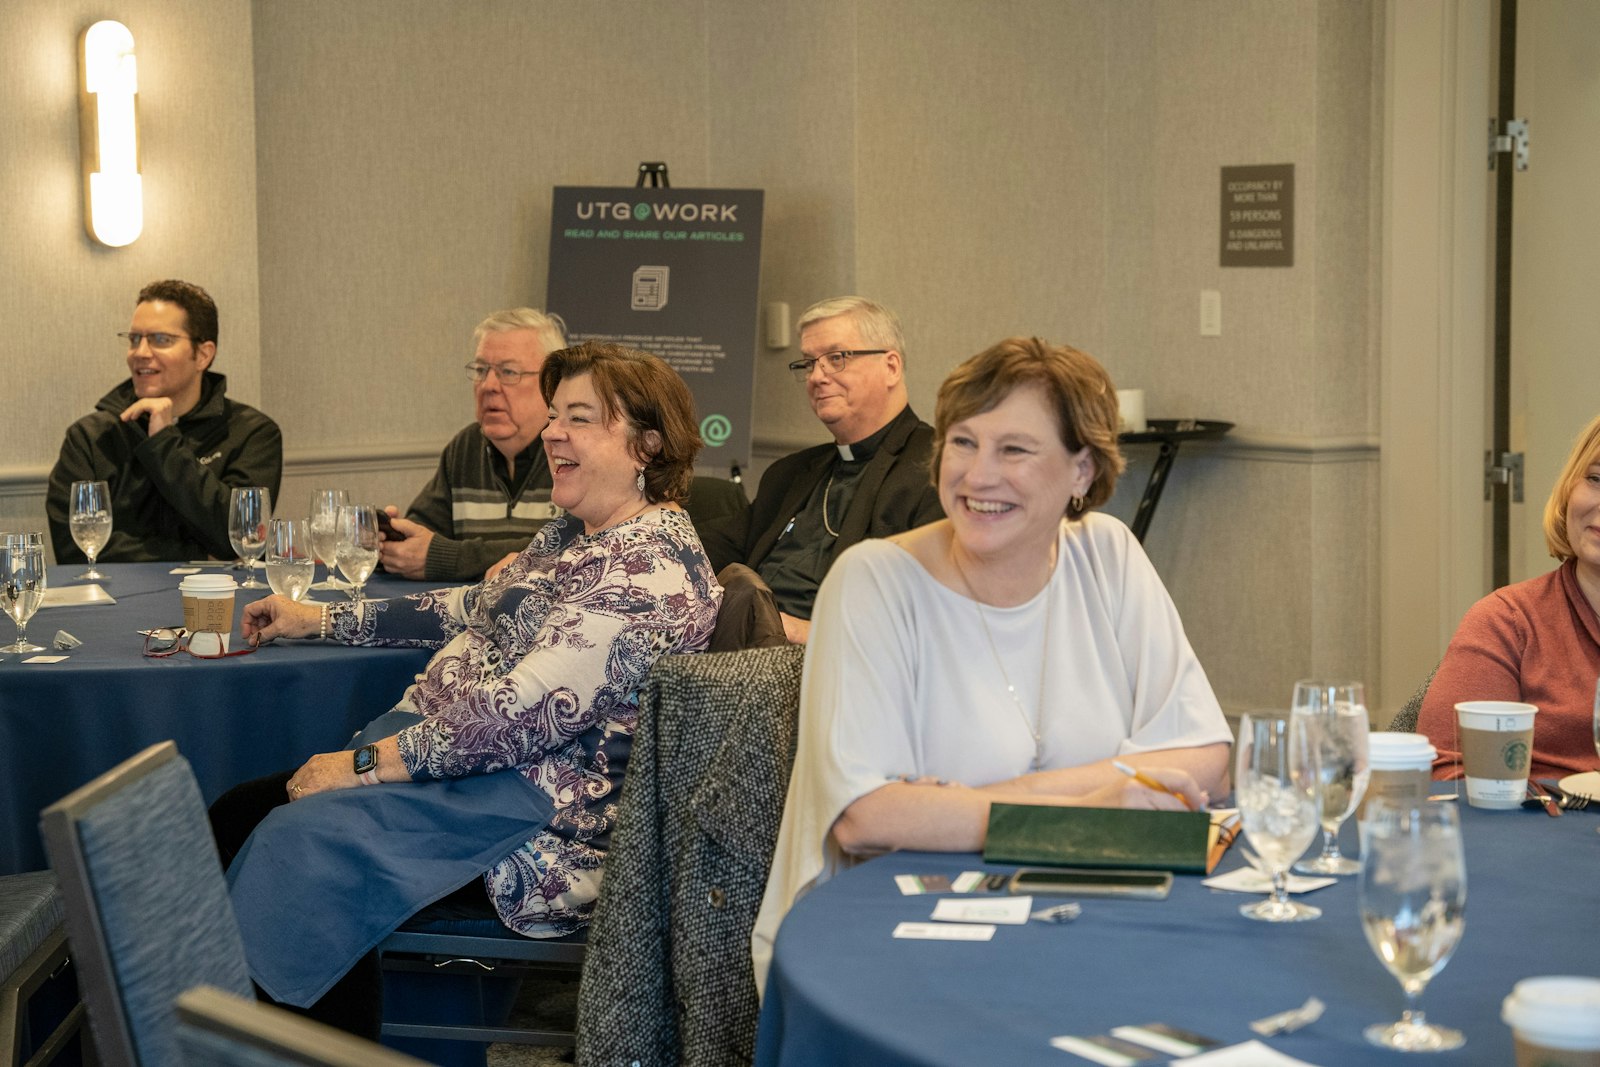 The roundtable, sponsored by the Michigan Catholic Foundation, preceded a Mass at St. Aloysius Parish in downtown Detroit, followed by a luncheon and discussion hosted by Dr. Grady next door at the Westin Cadillac Hotel.